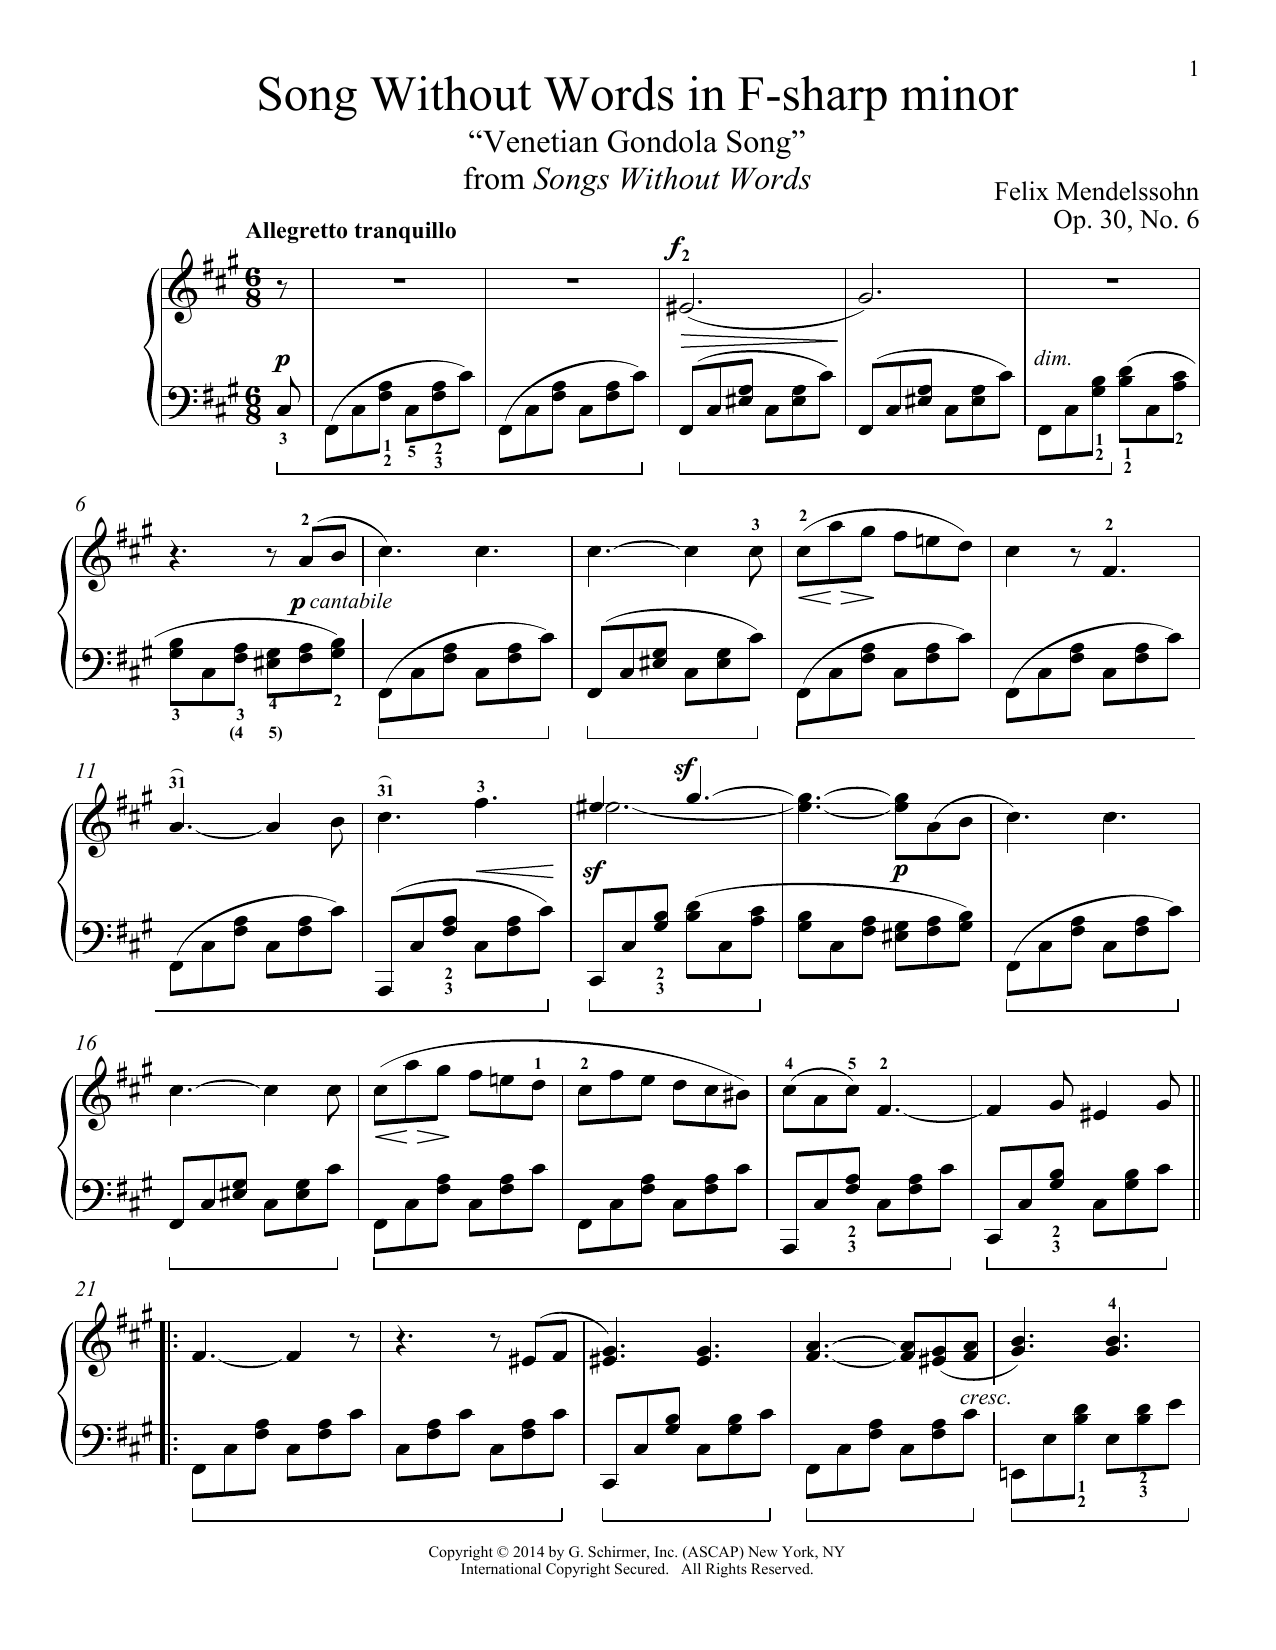 Felix Mendelssohn Song Without Words In F-Sharp Minor 